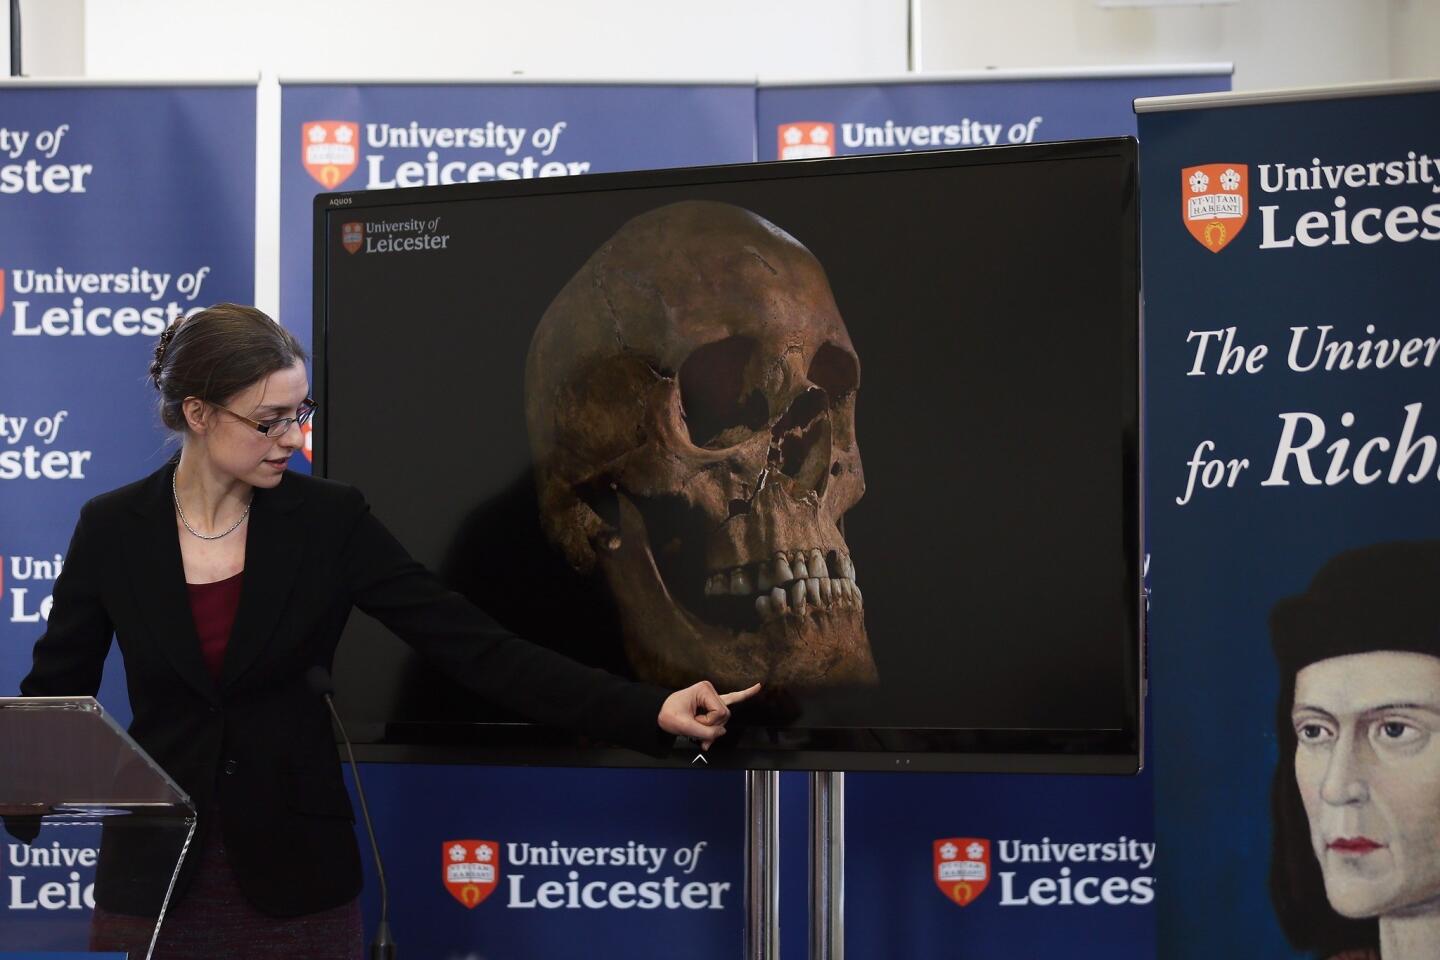 University of Leicester's announcement on King Richard III